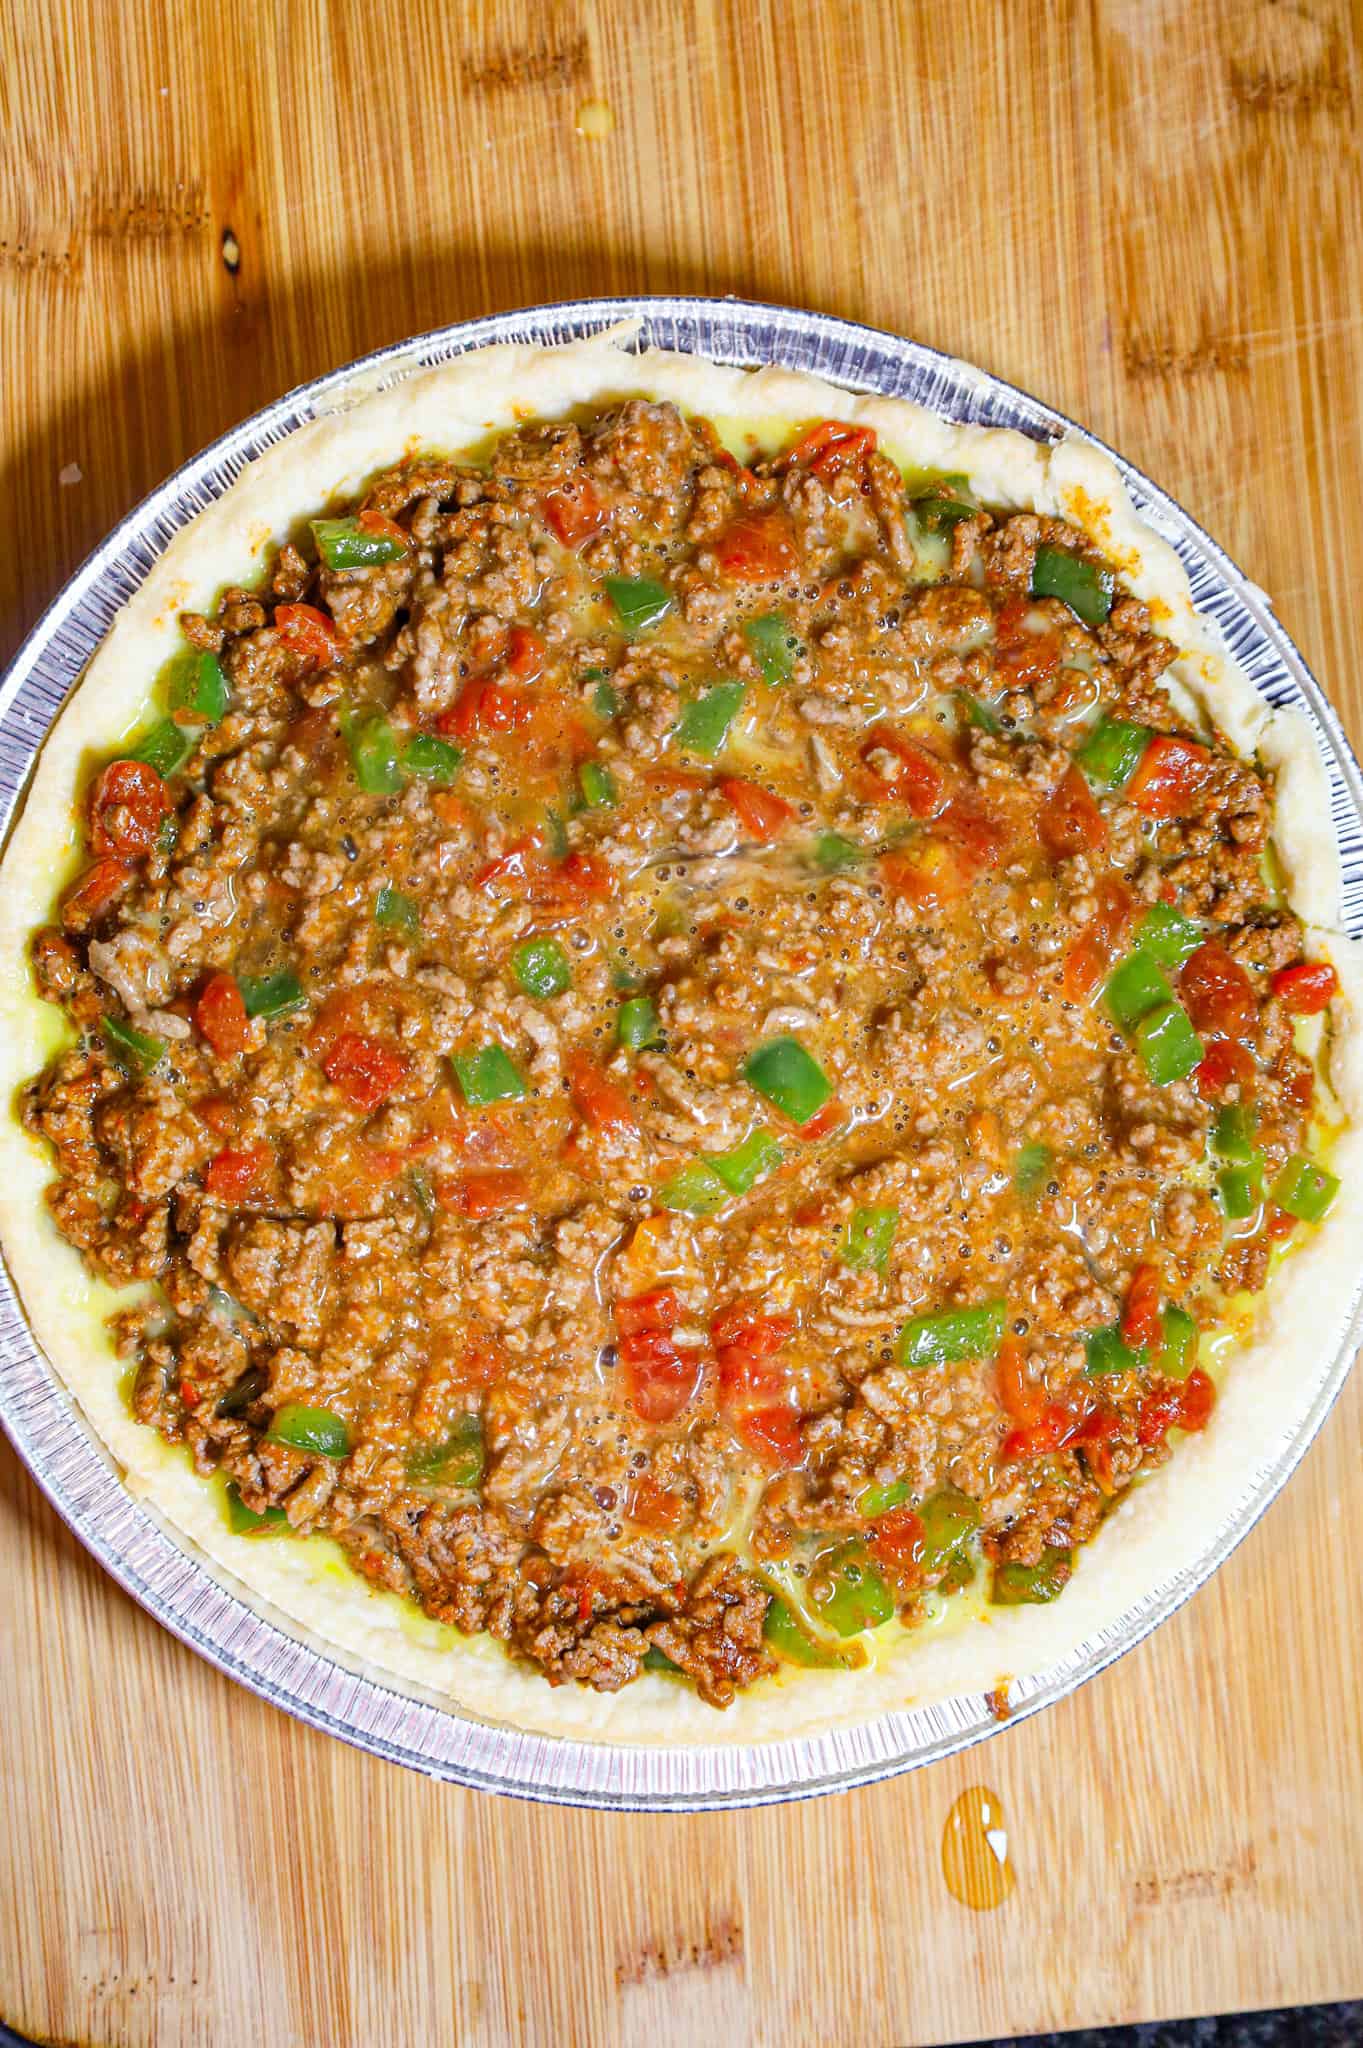 eggs poured into ground beef mixture in a pie crust